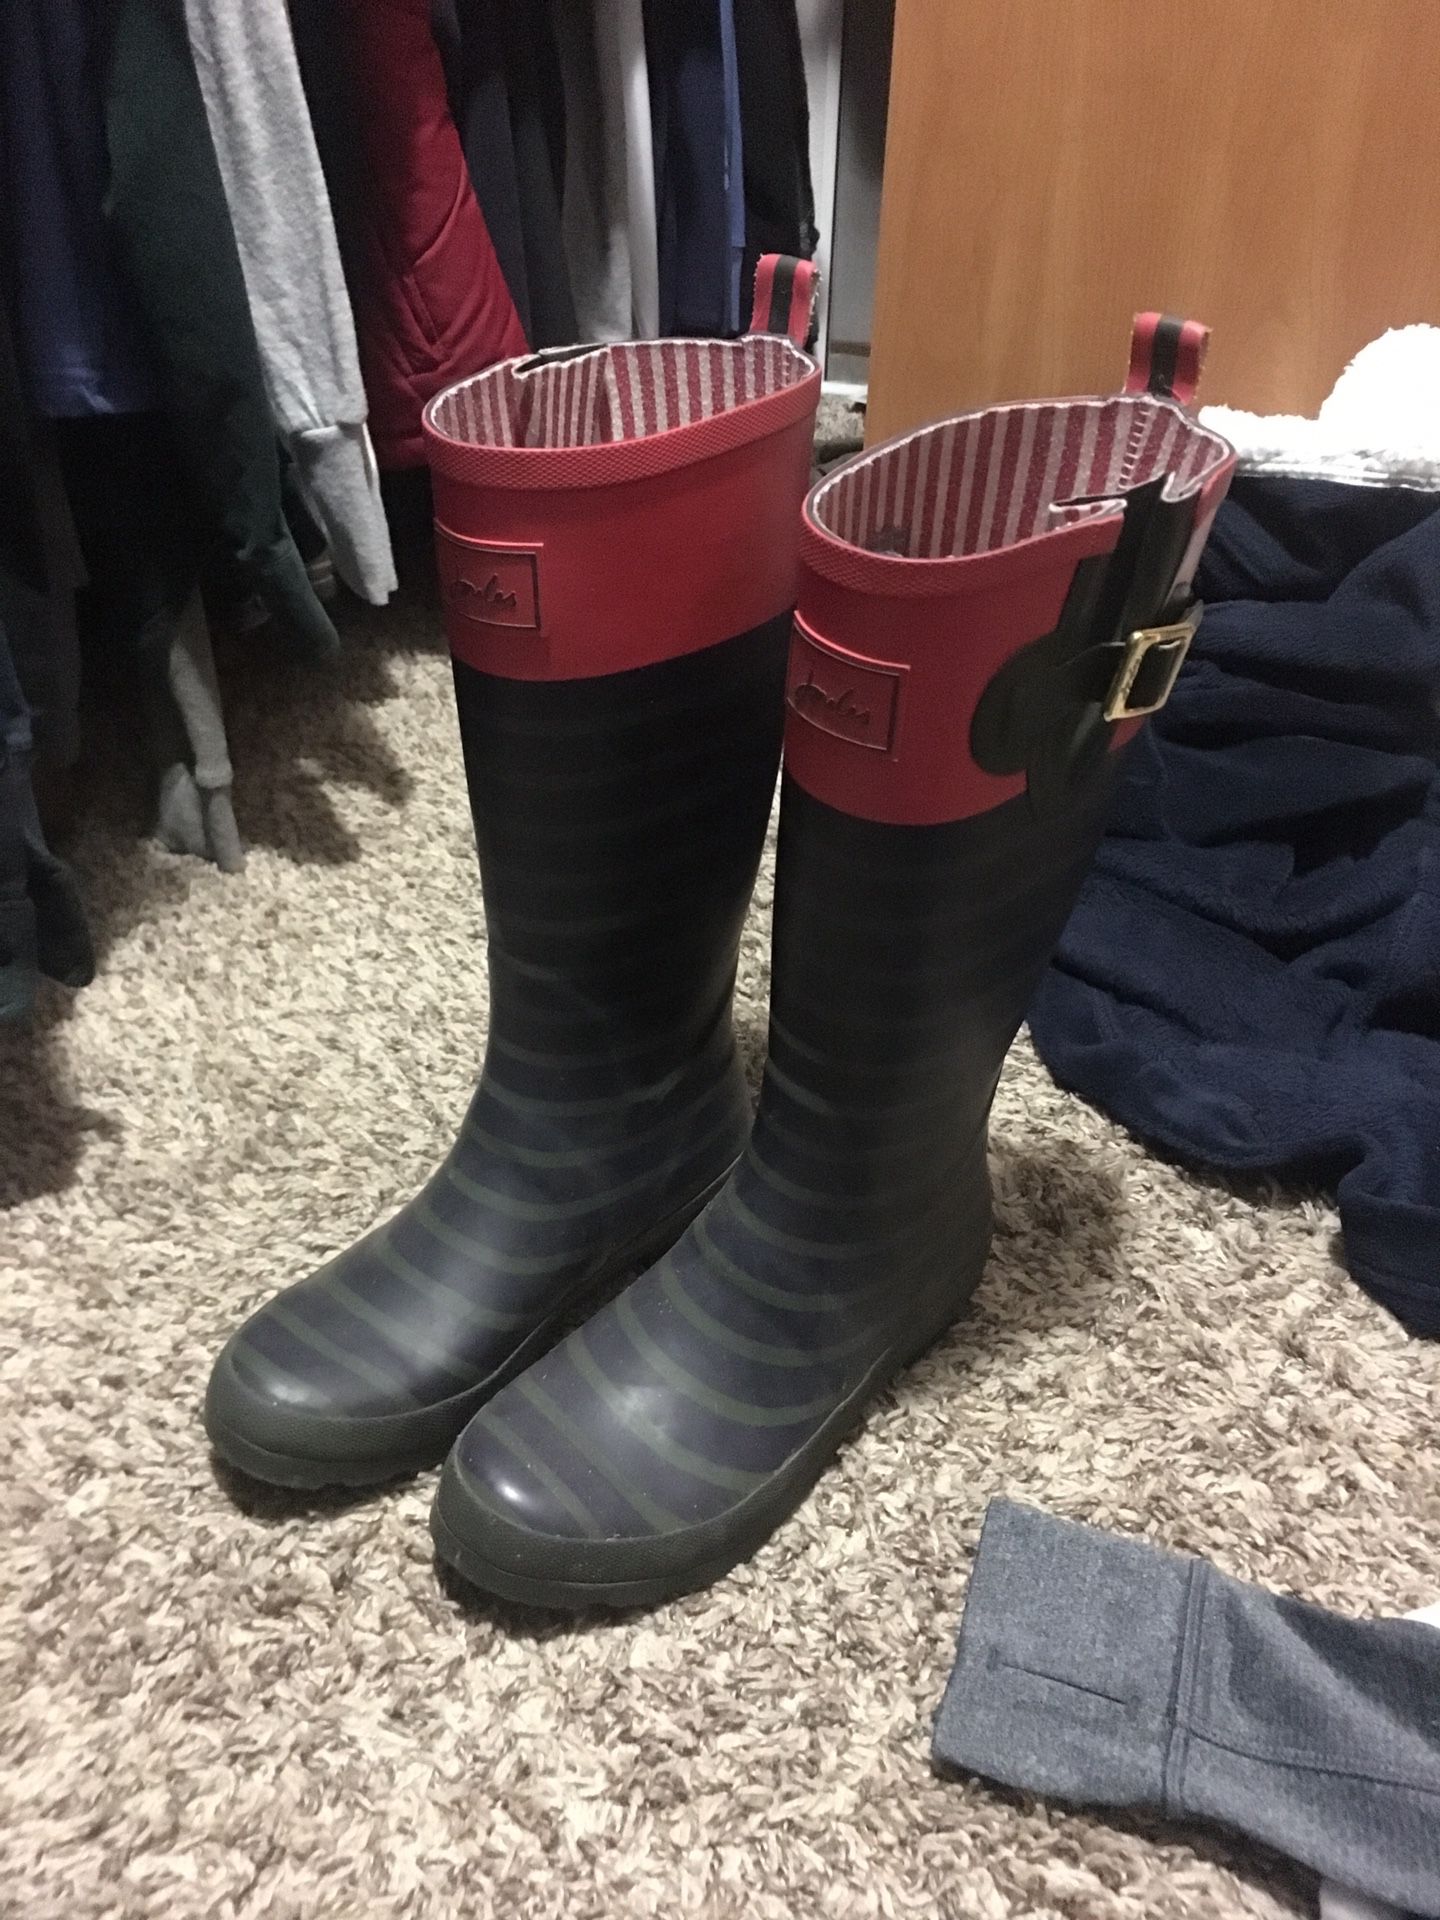 Joules striped rain boots